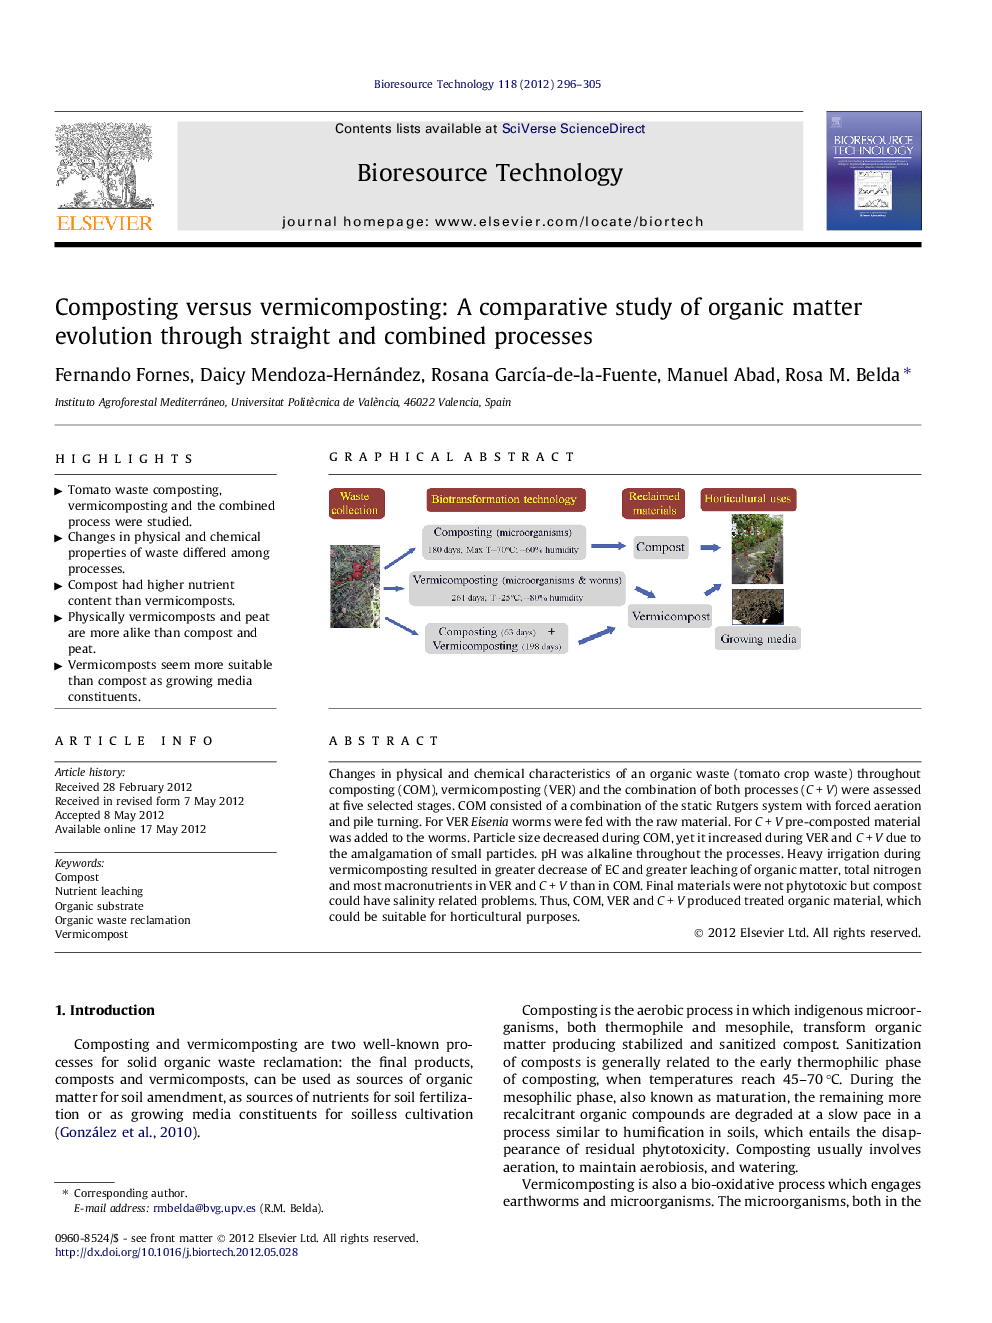 Composting versus vermicomposting: A comparative study of organic matter evolution through straight and combined processes